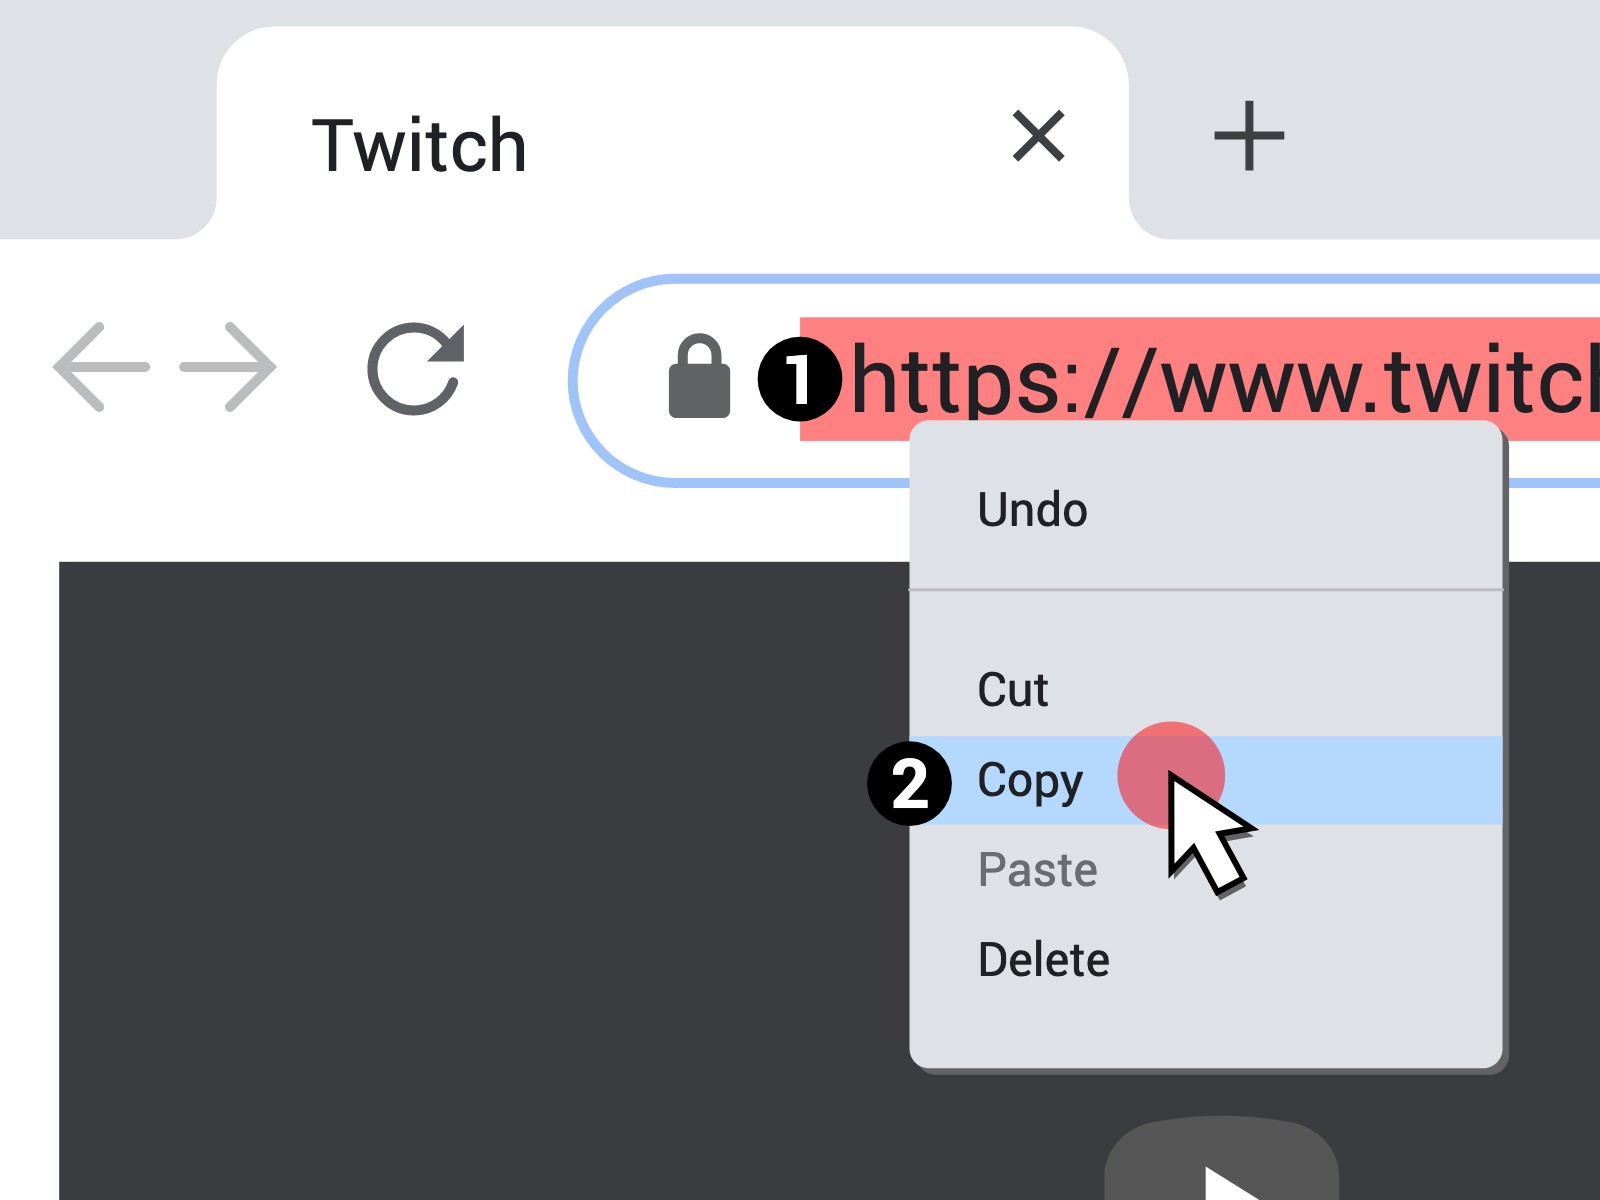 How To Download Twitch Clips